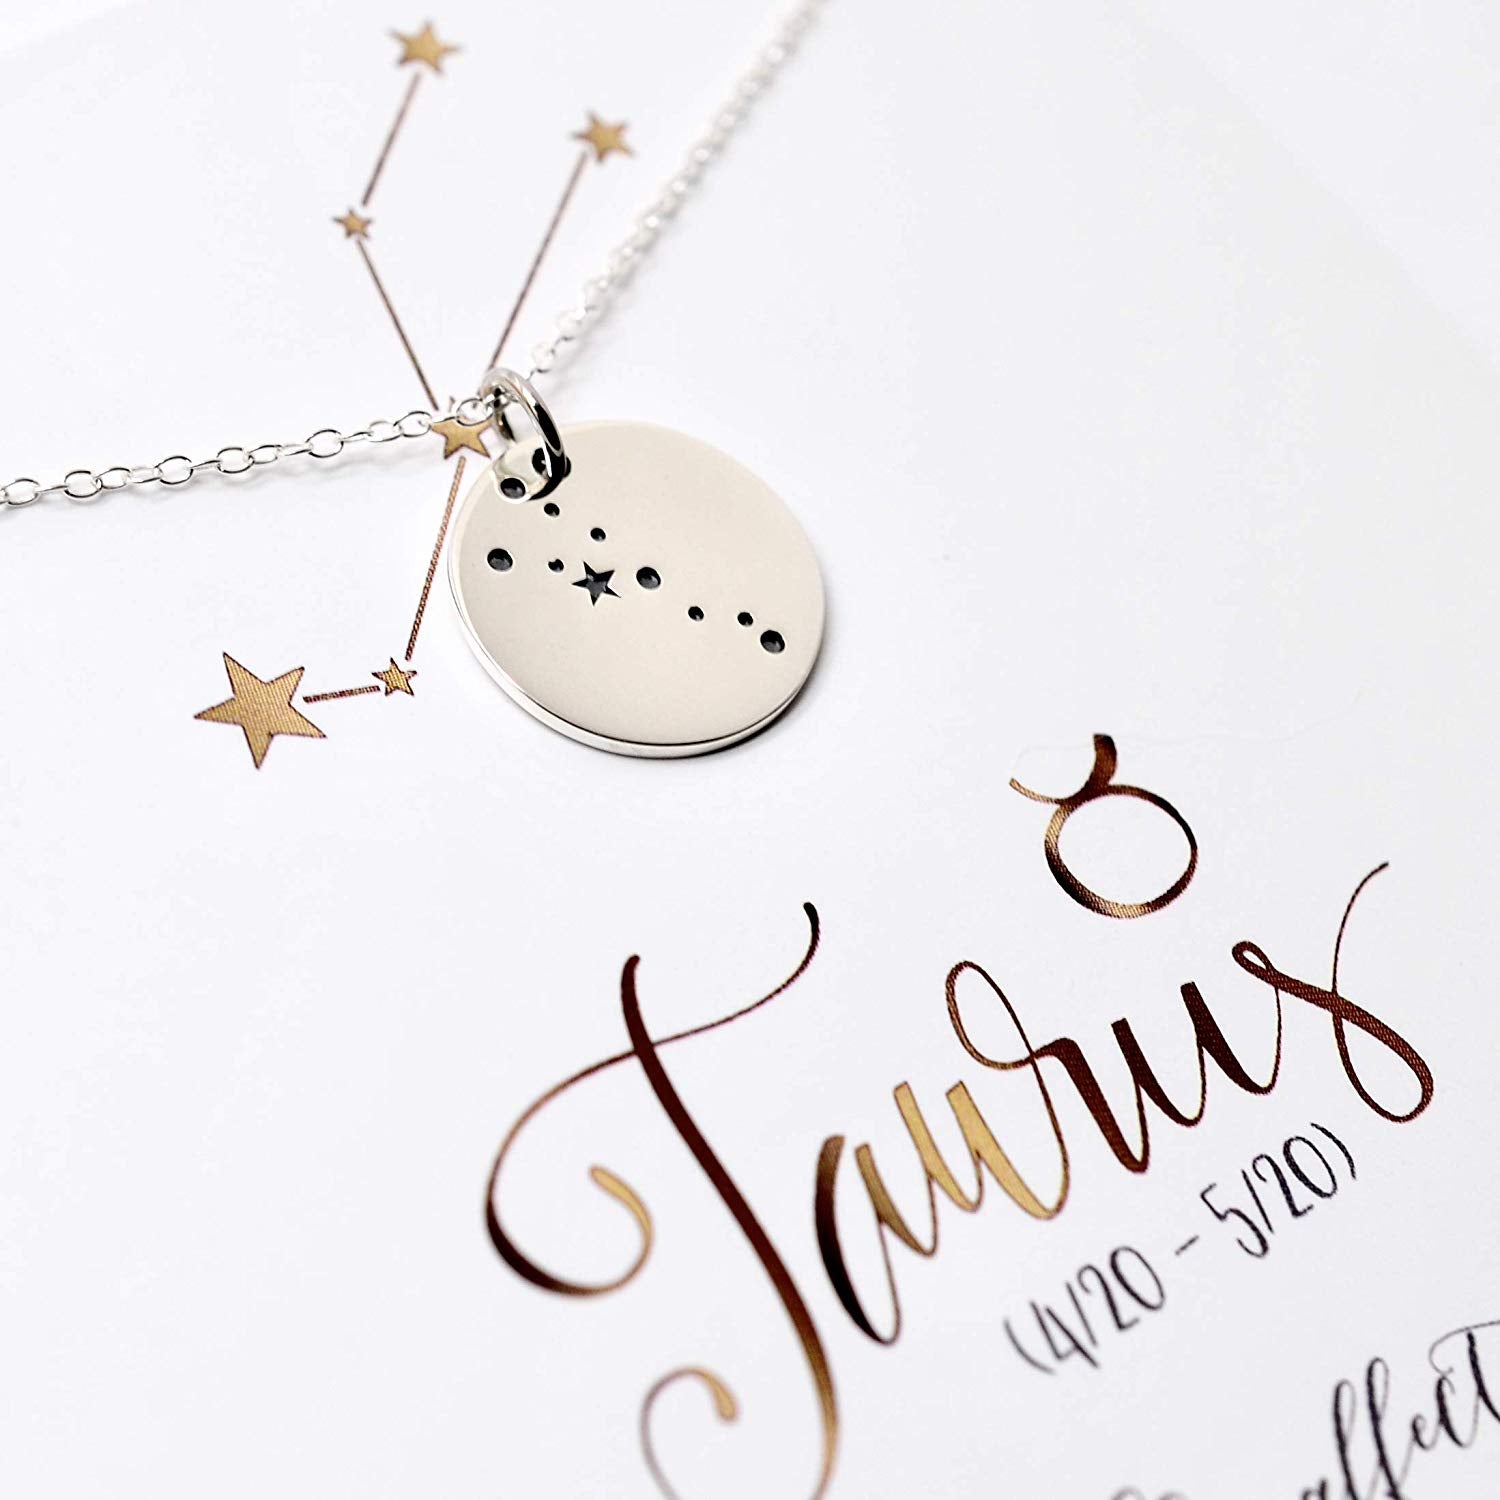 Taurus Silver Pendant: Meaning, Usage & Benefits - A Complete Guide!